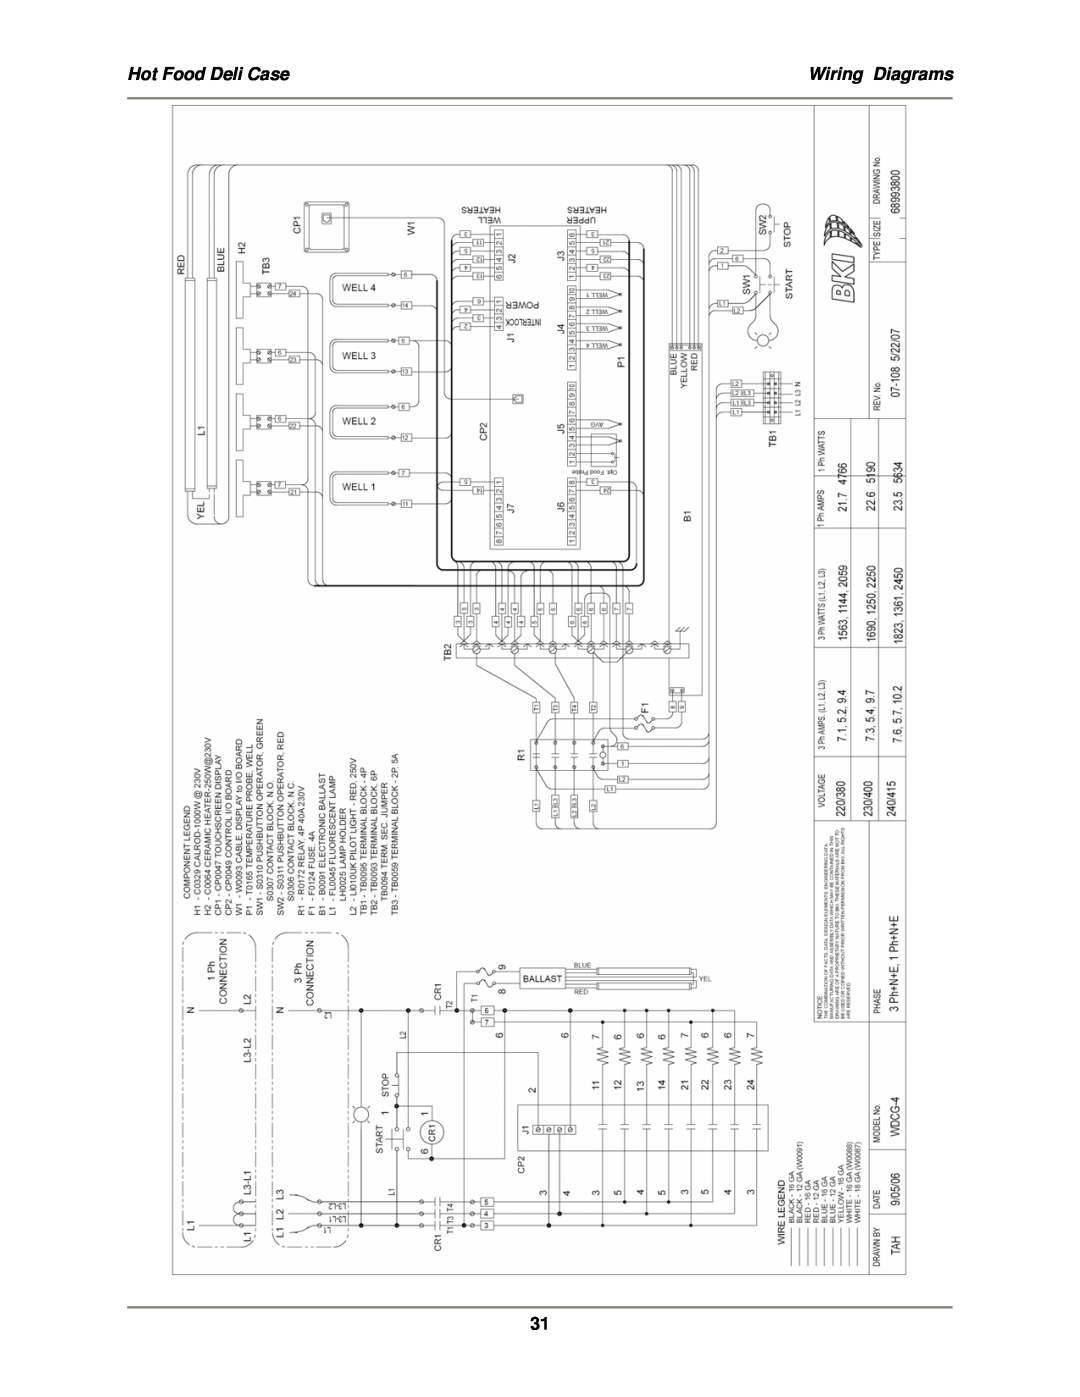 Bakers Pride Oven WDCG, SSWG, CSWG operation manual Hot Food Deli Case, Wiring Diagrams 